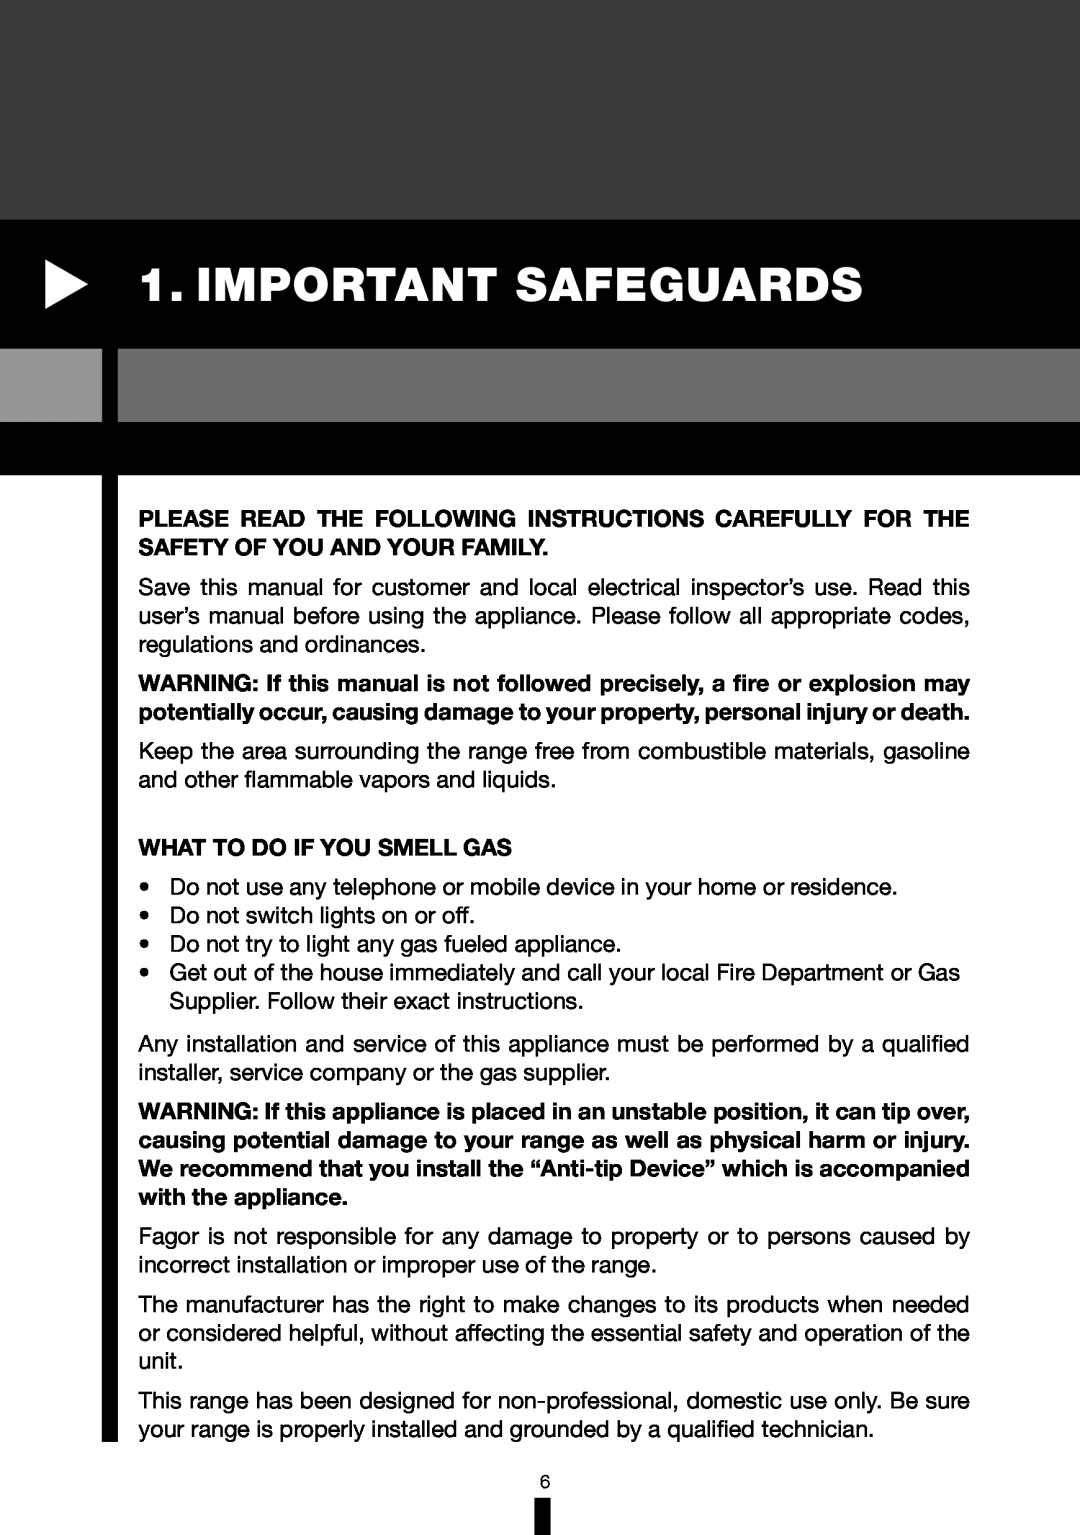 Fagor America RFA-365 DF, RFA-244 DF manual Important Safeguards, What To Do If You Smell Gas 